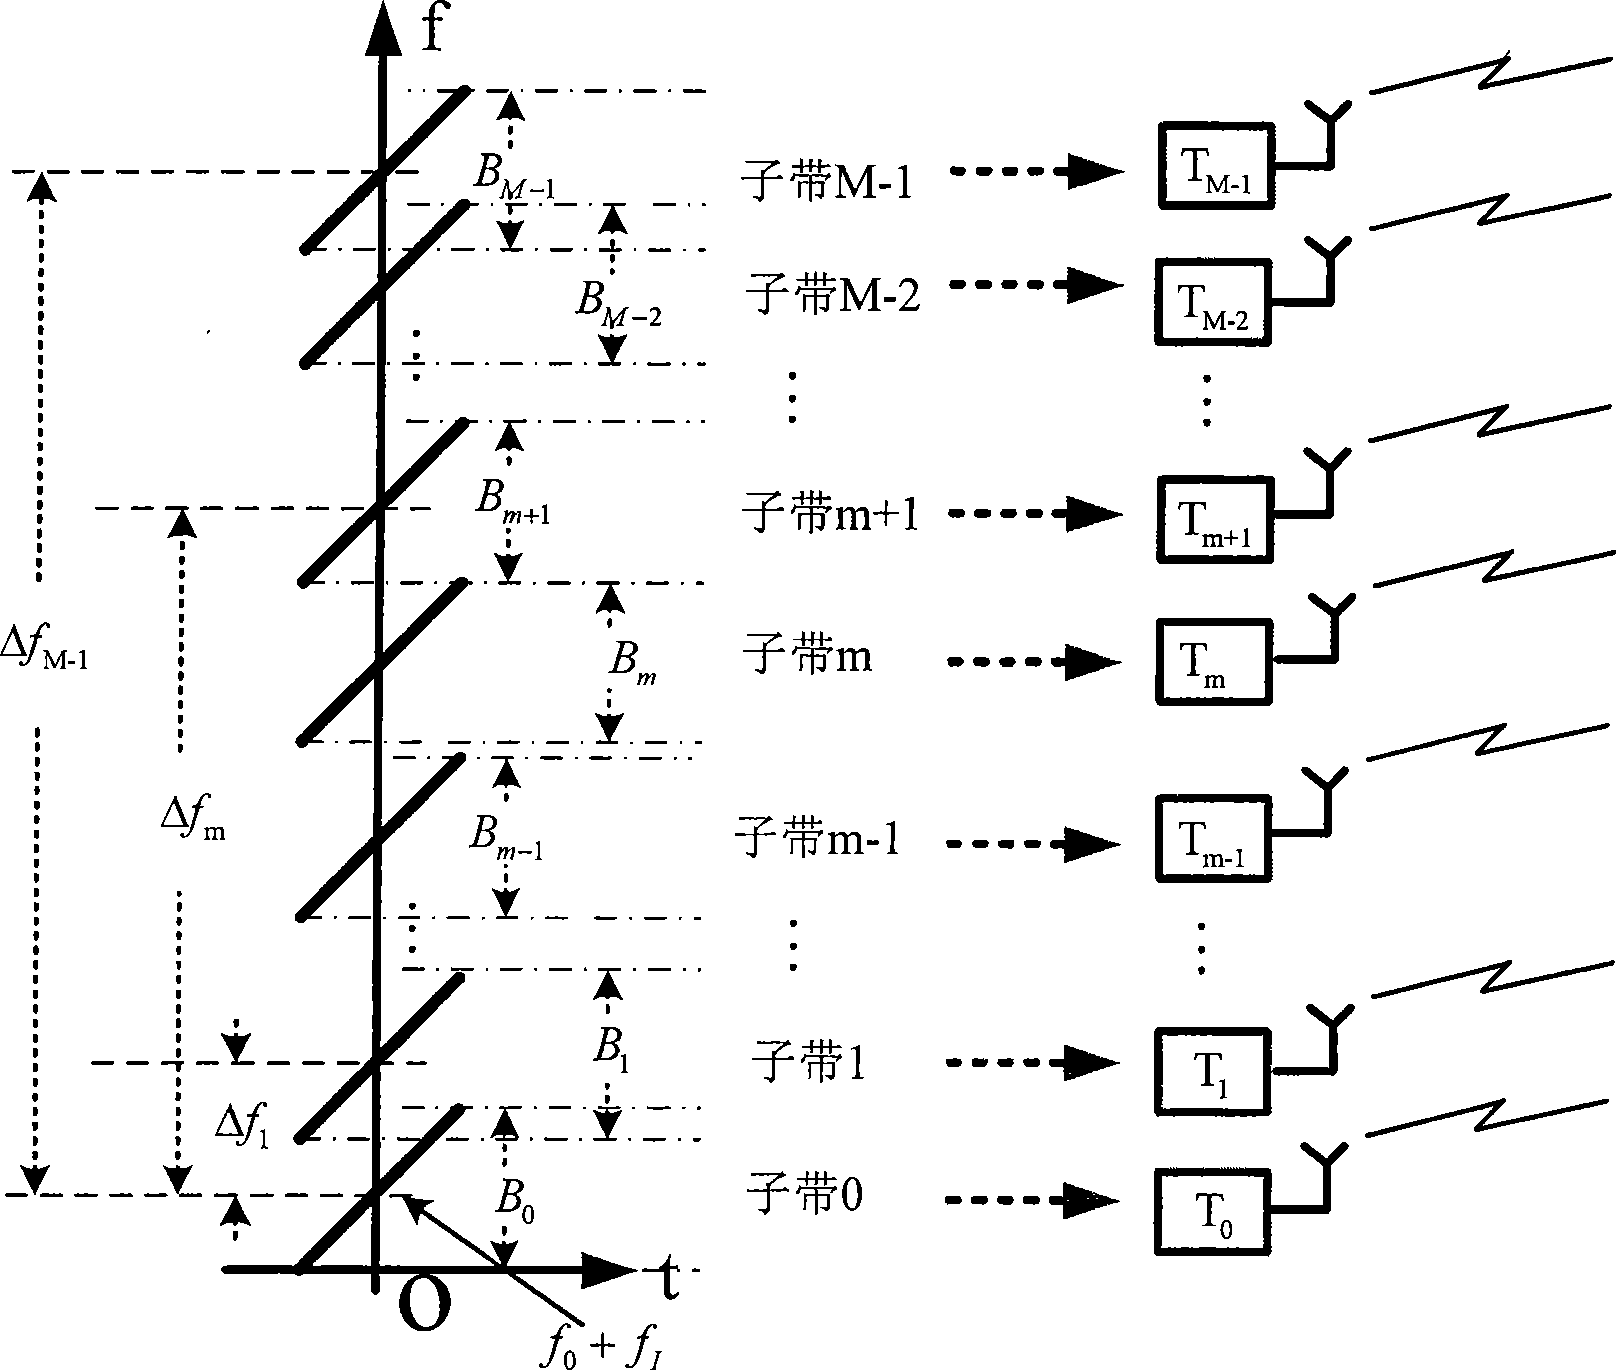 Broadband signal synthesizing method based on multi-sending and multi-receiving frequency division radar